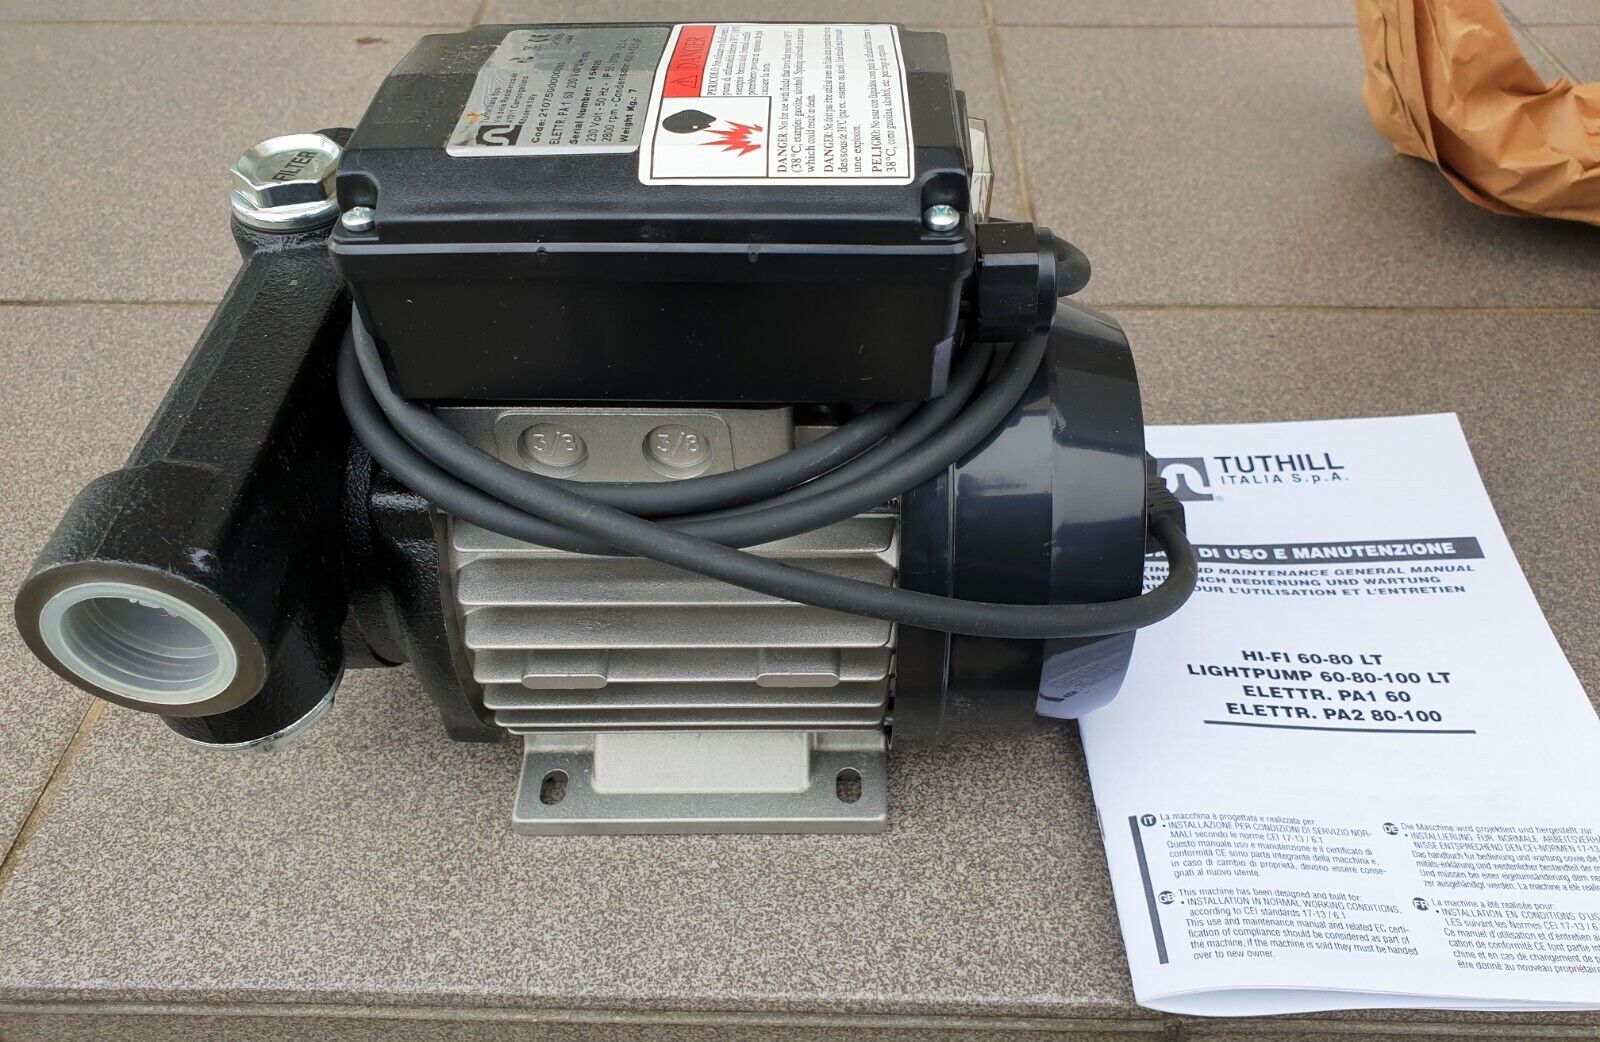 Tuthill Elettr. store PA 1 60 Diesel 50 5A Challenge the lowest price 2 370W Pump 230V